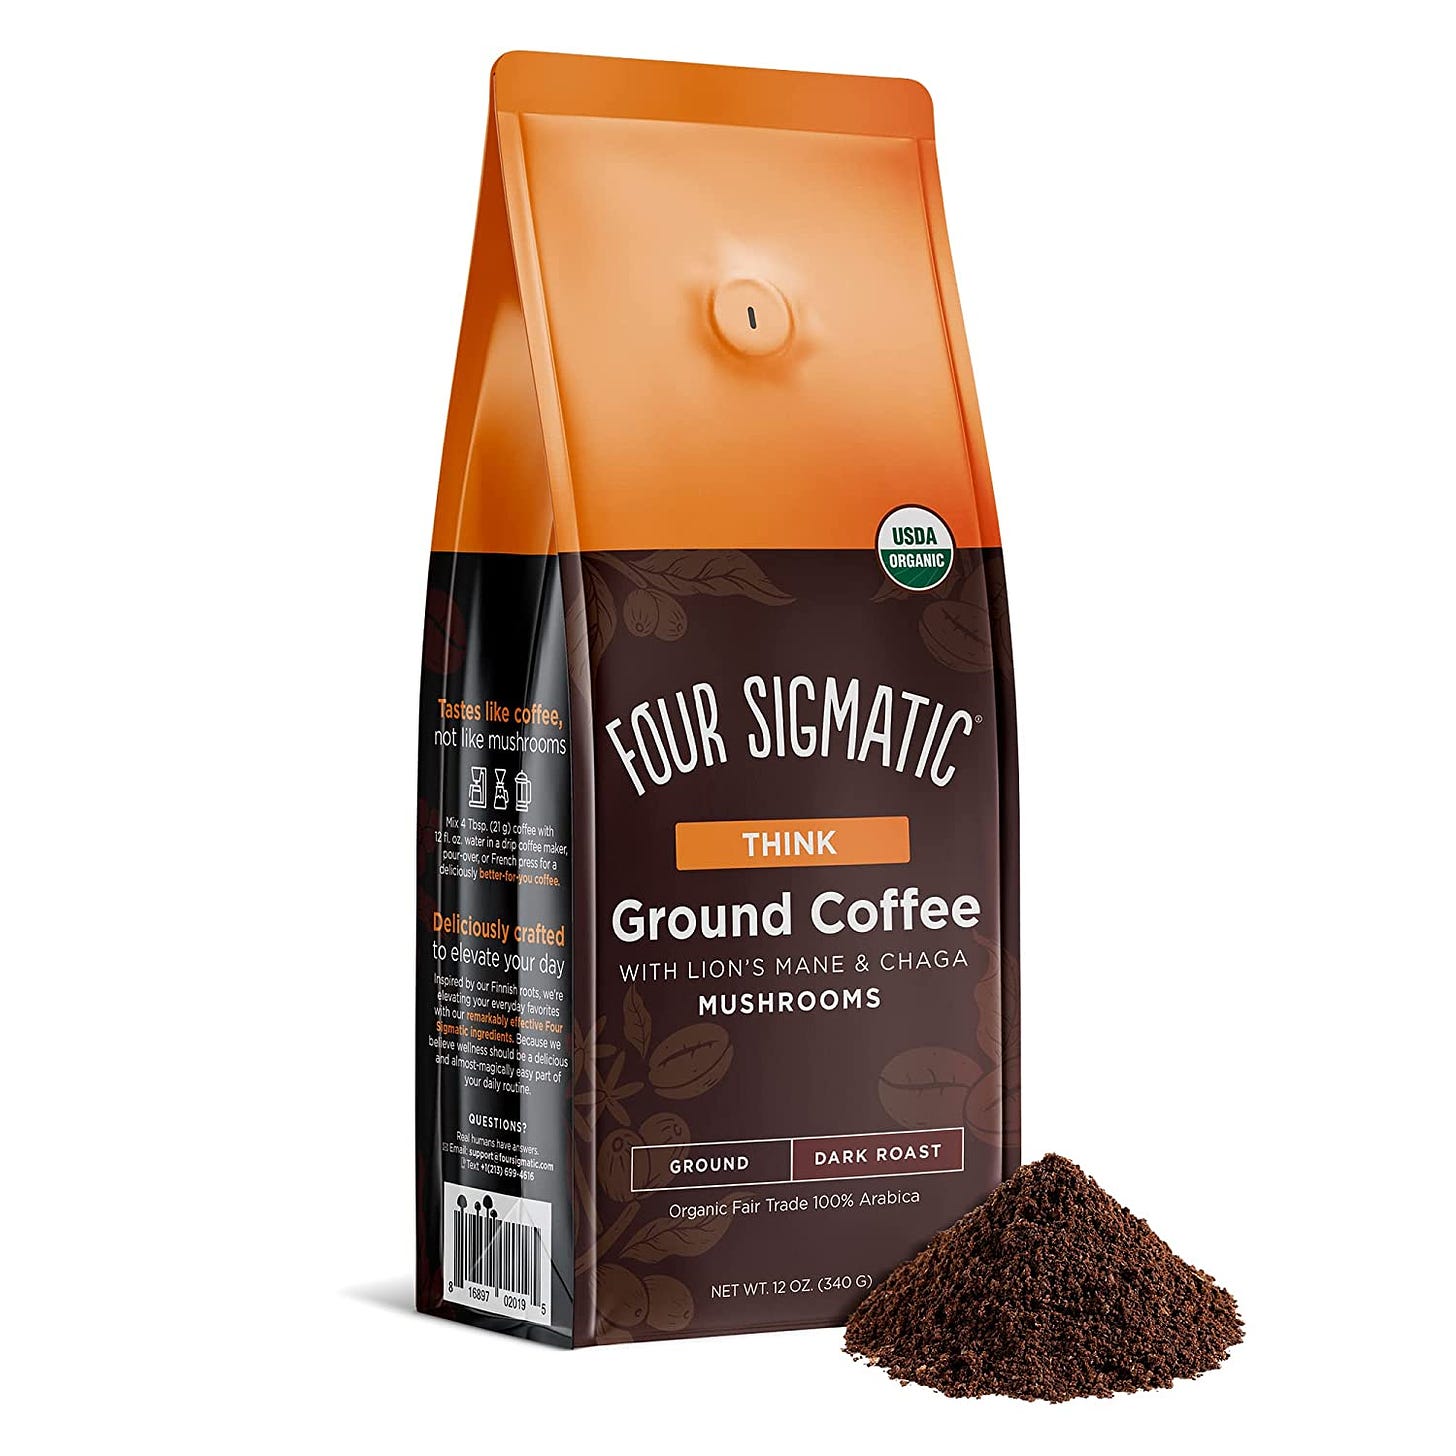 photo of Four Sigmatic coffee